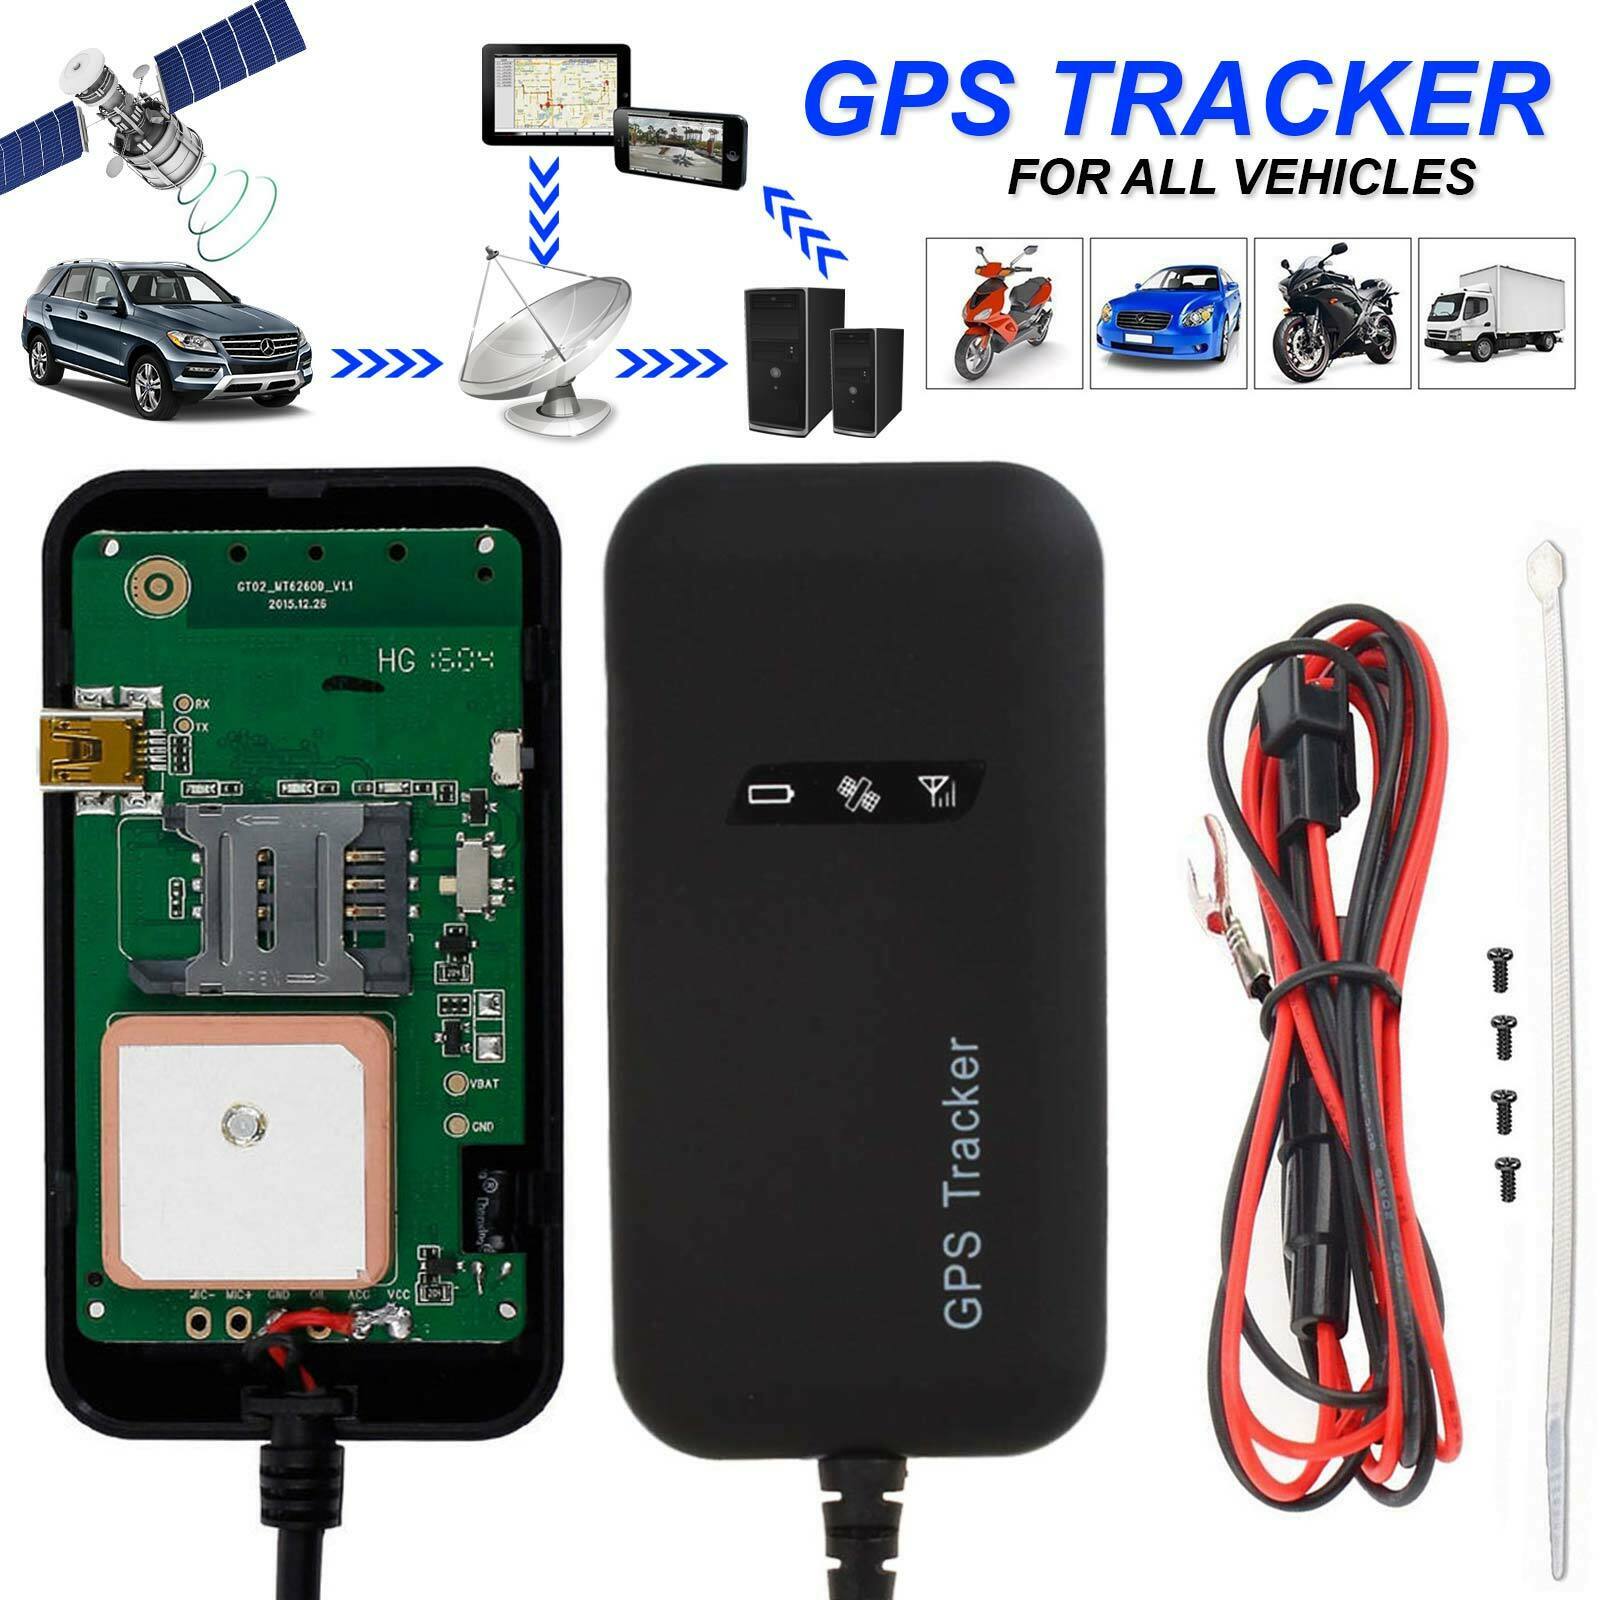 Realtime GPS GPRS GSM Tracker Tracking Device For Car, Van, Vehicle, Motorcycle - Lifafa Denmark